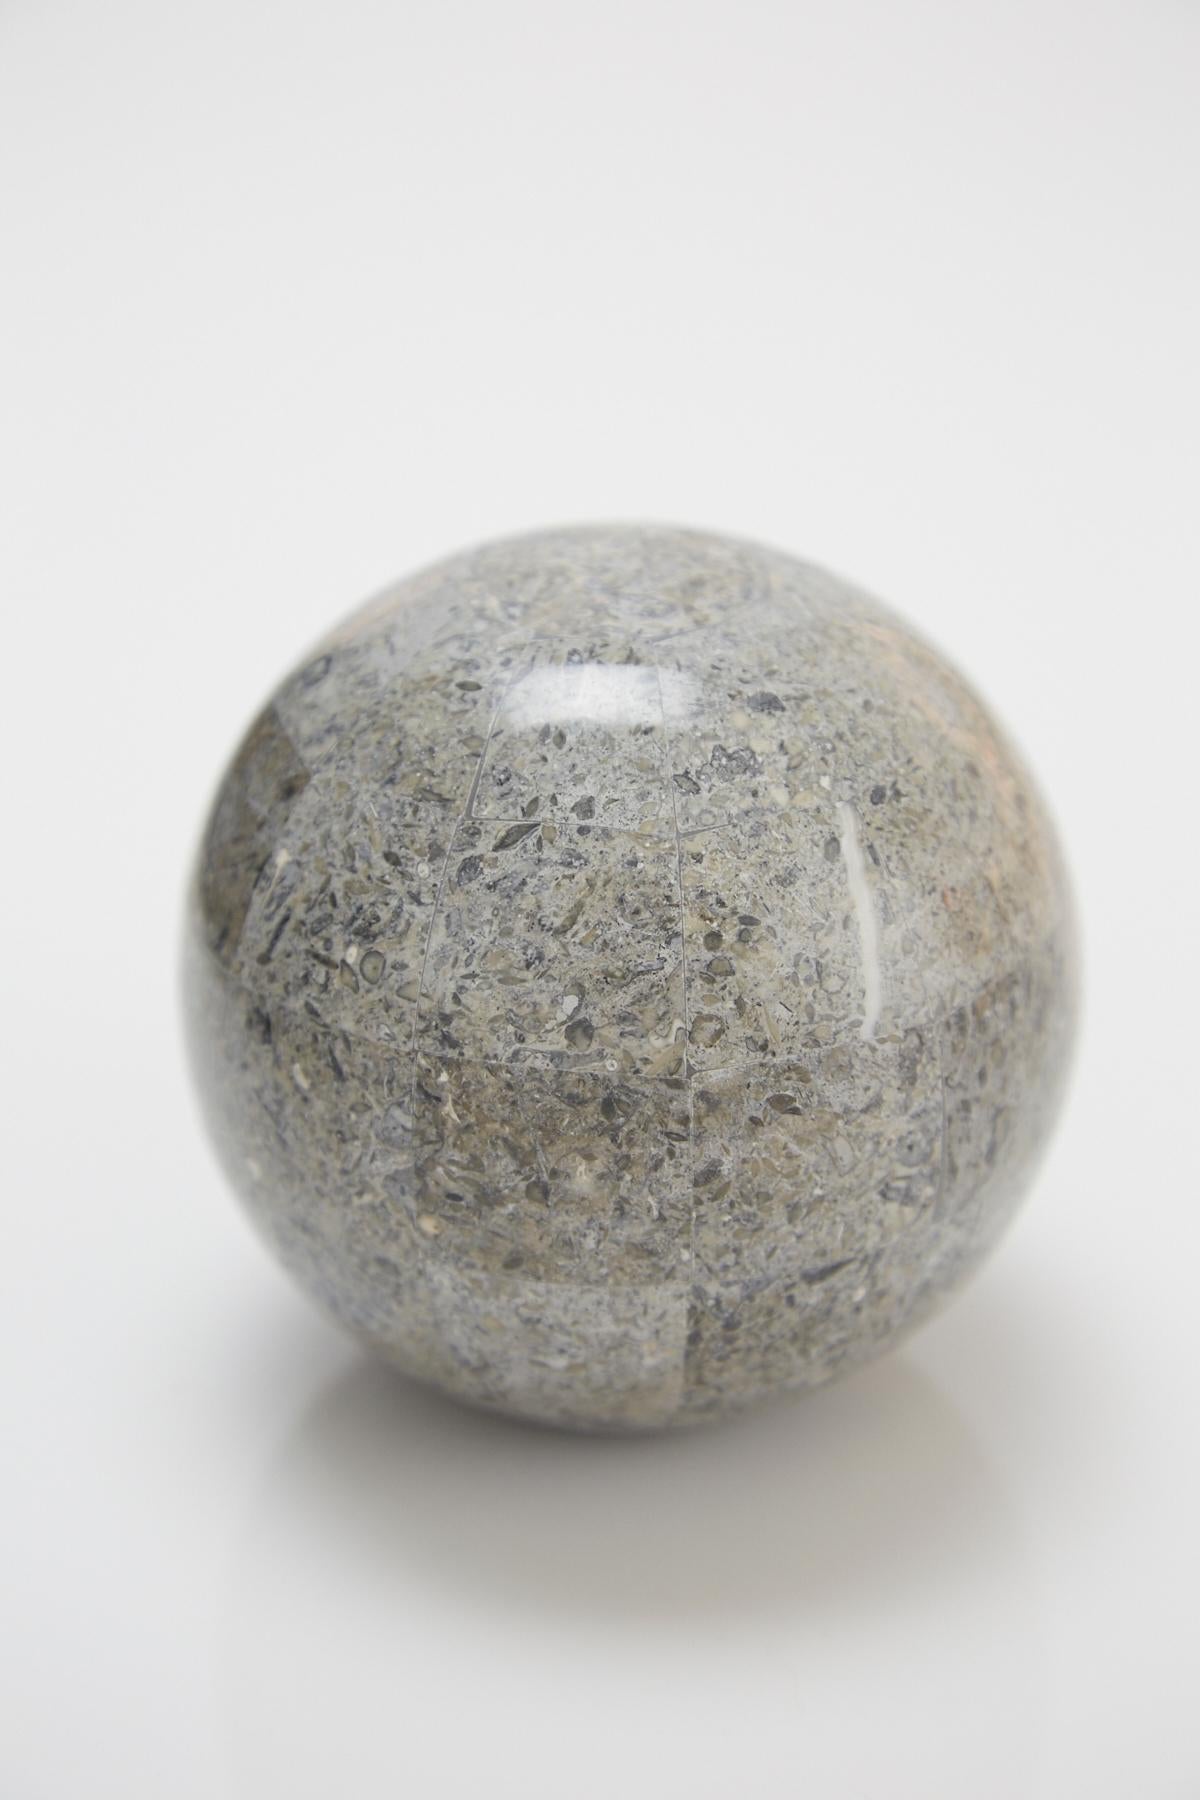 Extra small decorative sphere measuring 3.5 in. diameter. Tessellated gray stone over fiberglass sphere with flattened end for balance.